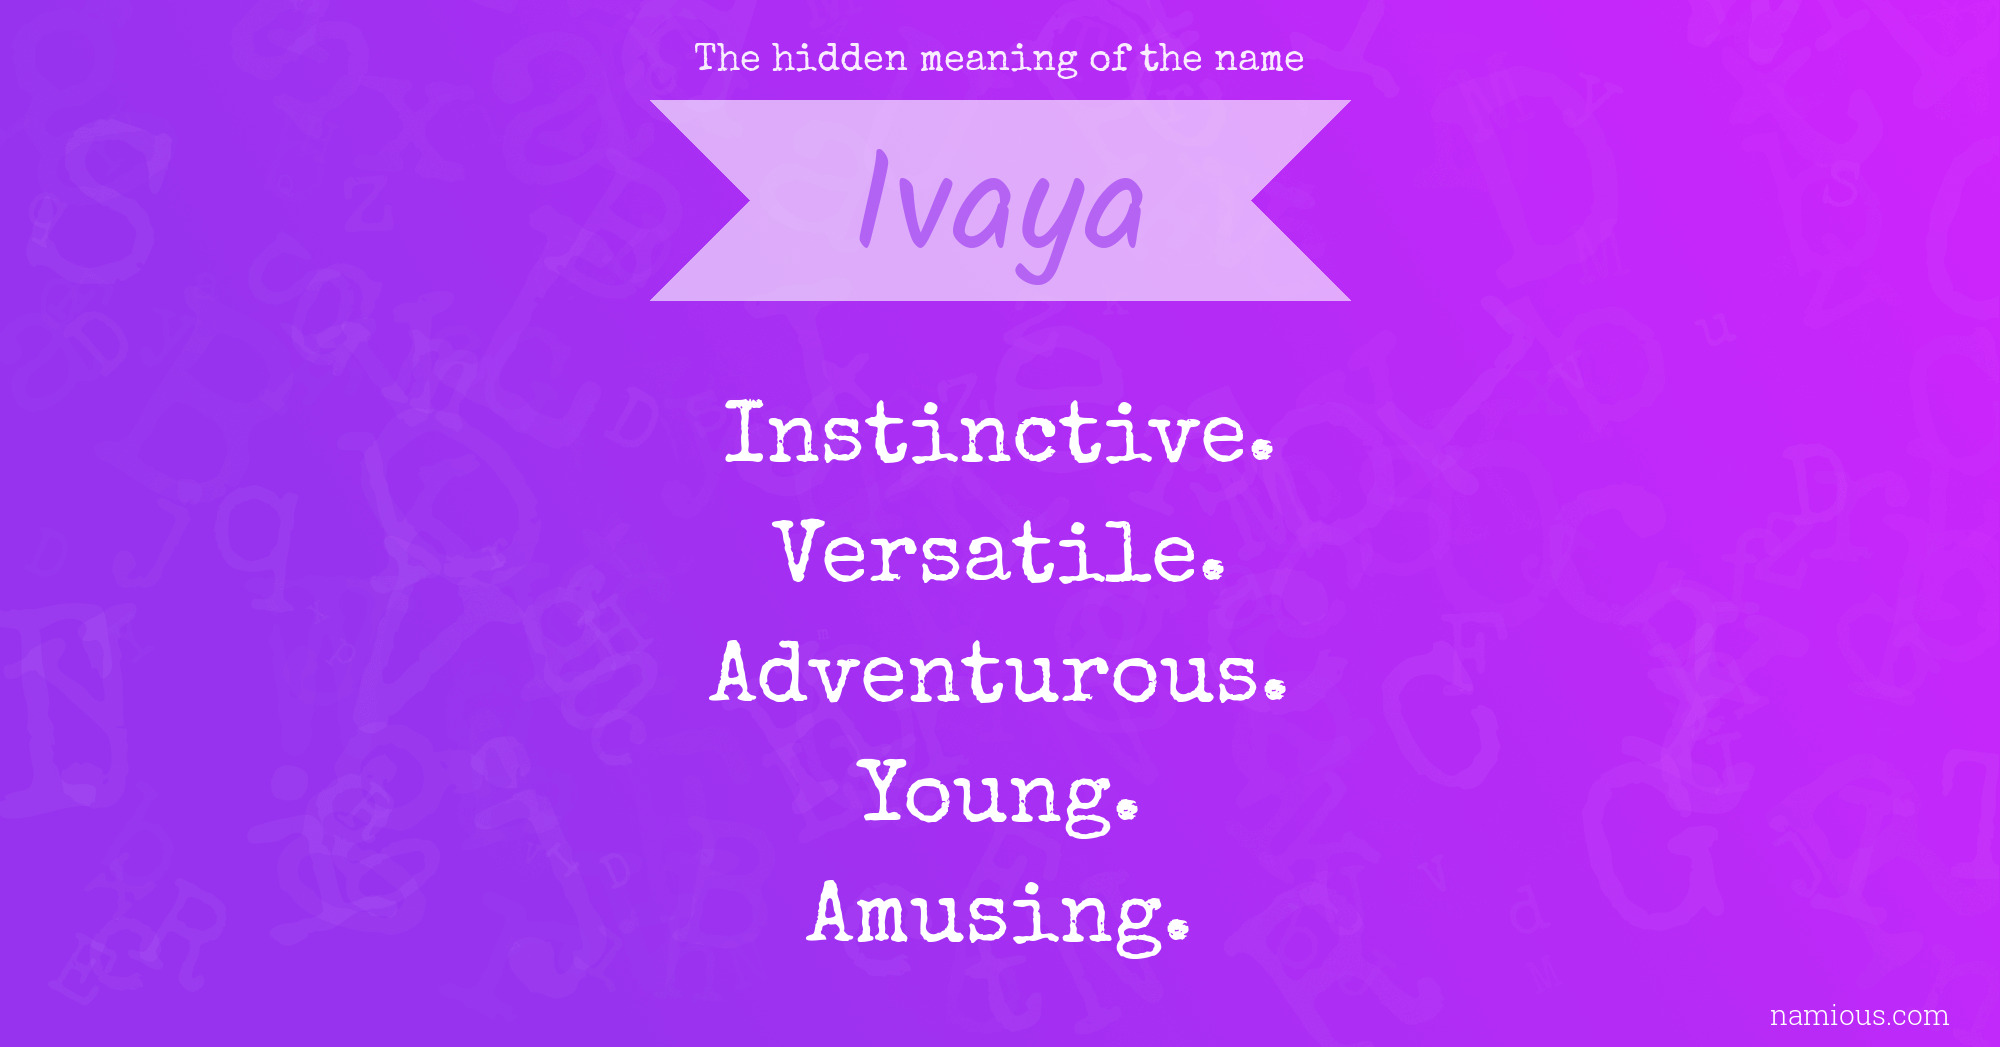 The hidden meaning of the name Ivaya